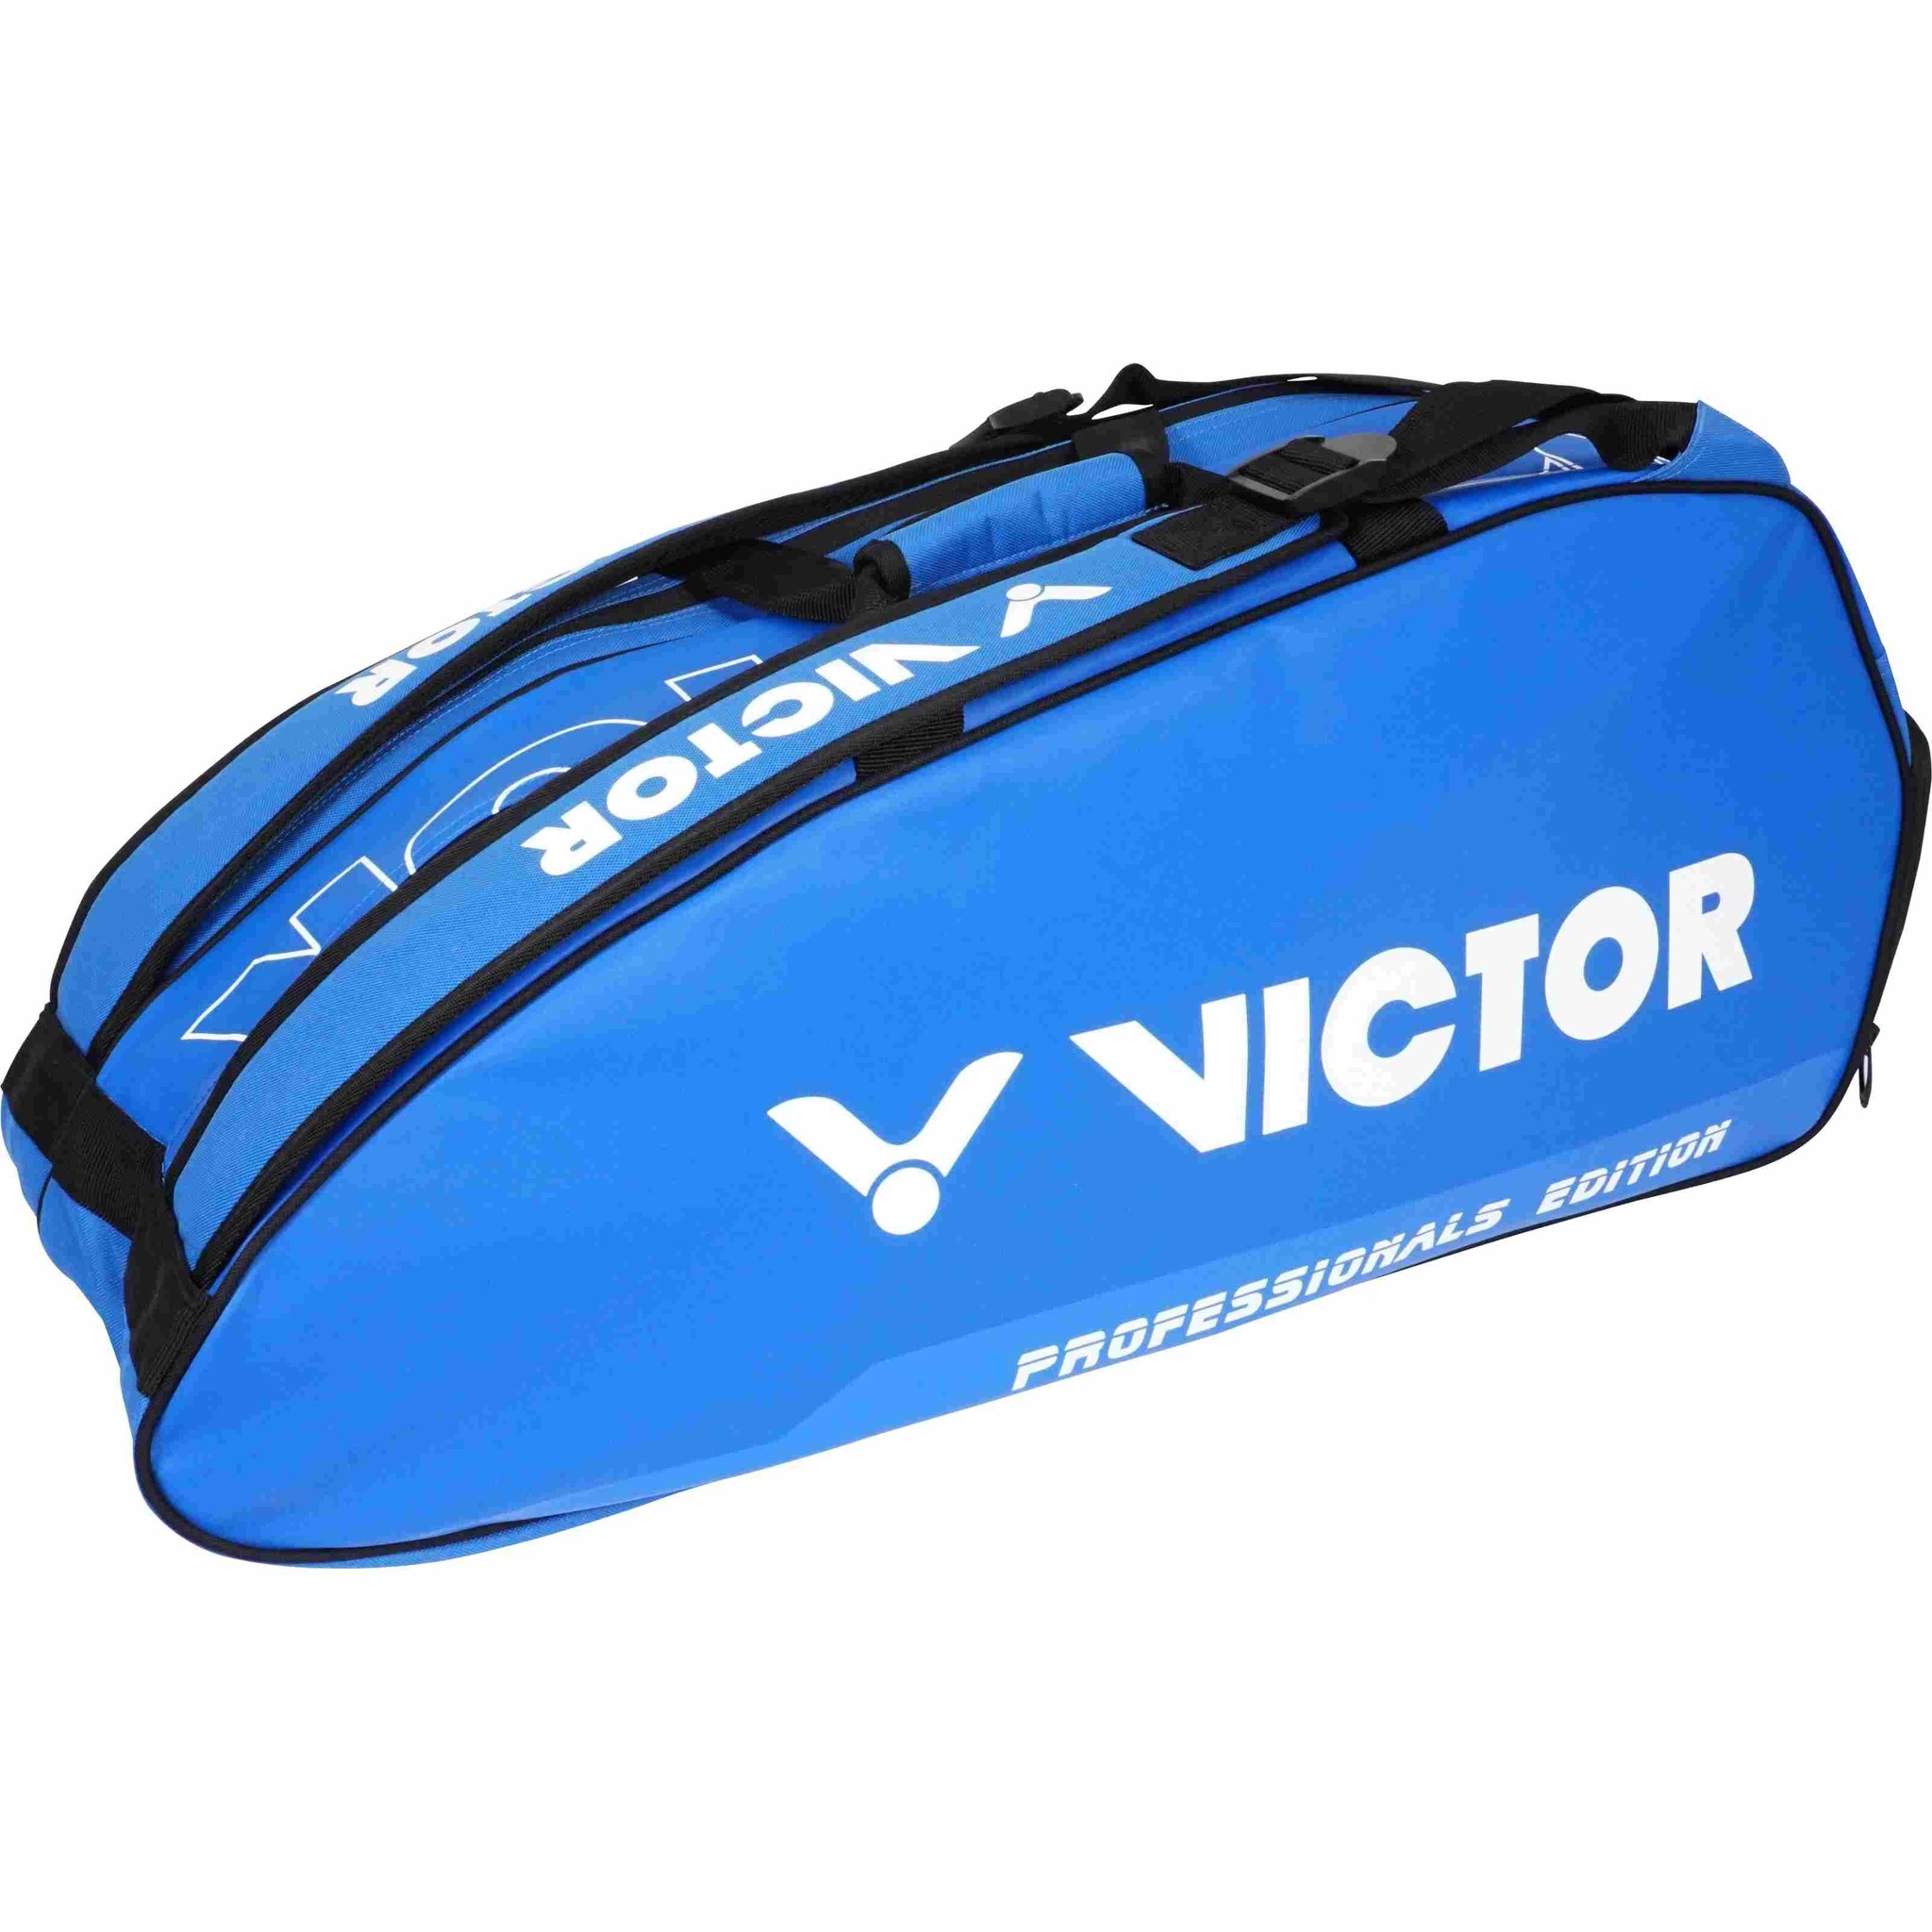 Buy Victor AG510U Badminton Kit Bag Blue and Black Online India | Victor  AG510U Badminton Kit Bag Blue and Black Lowest Prices & Reviews India |  kheladda.in